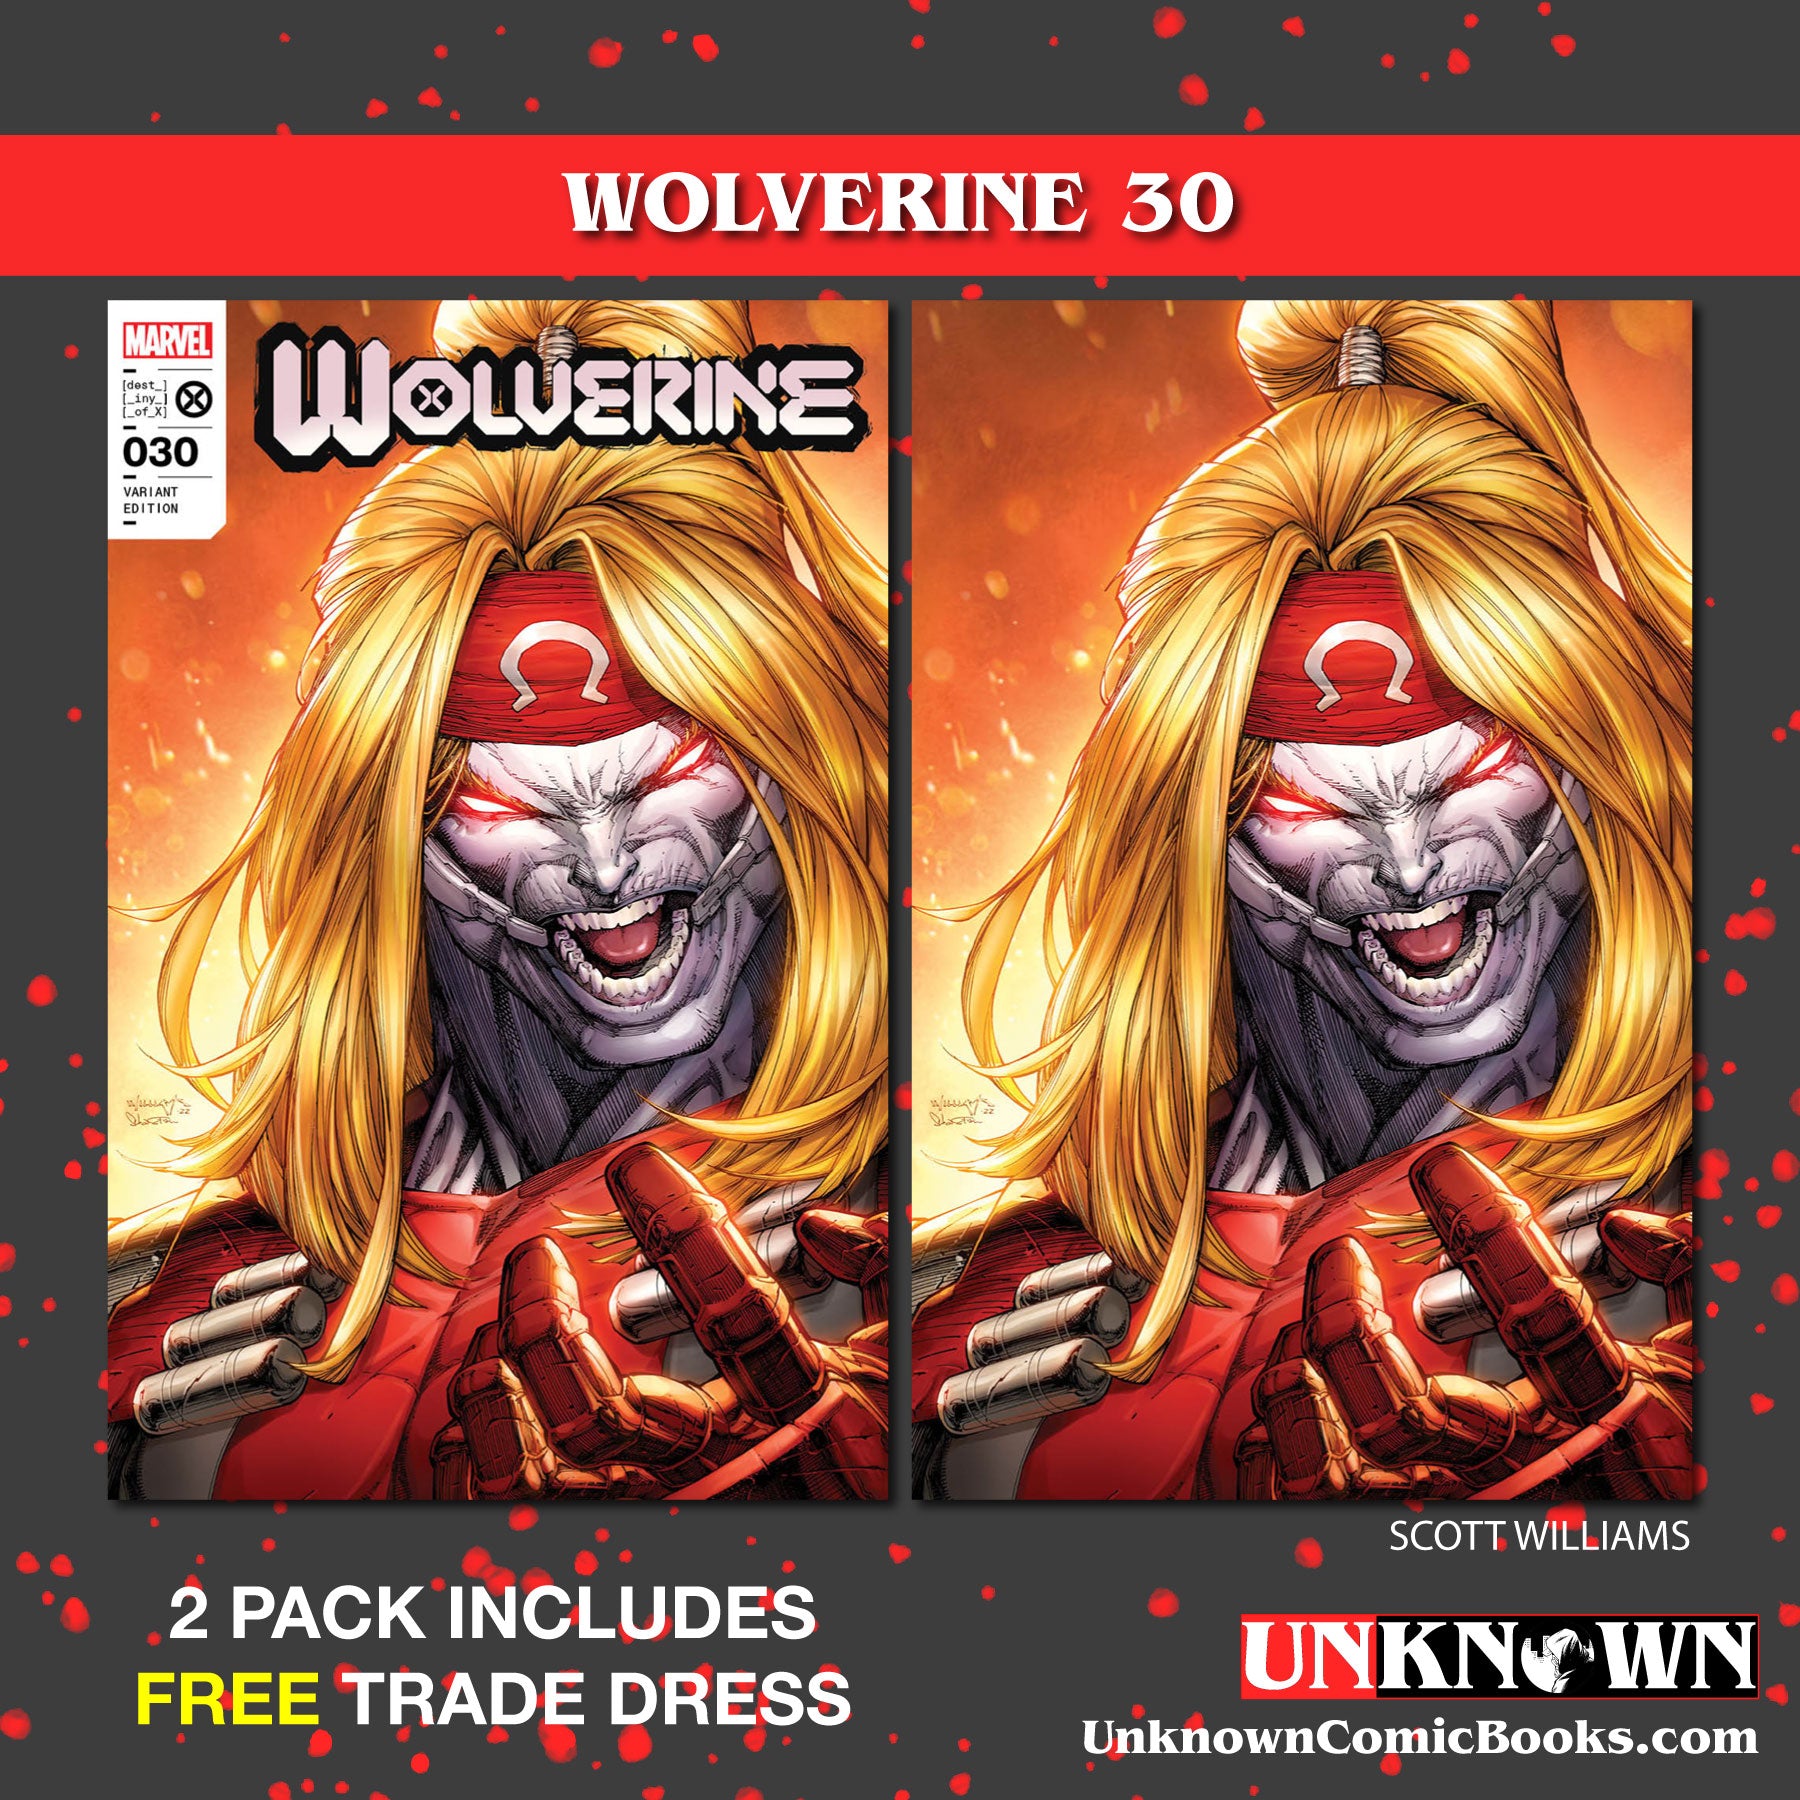 [2 PACK] **FREE TRADE DRESS** WOLVERINE #30 UNKNOWN COMICS SCOTT WILLIAMS EXCLUSIVE VAR ICON (02/15/2023)